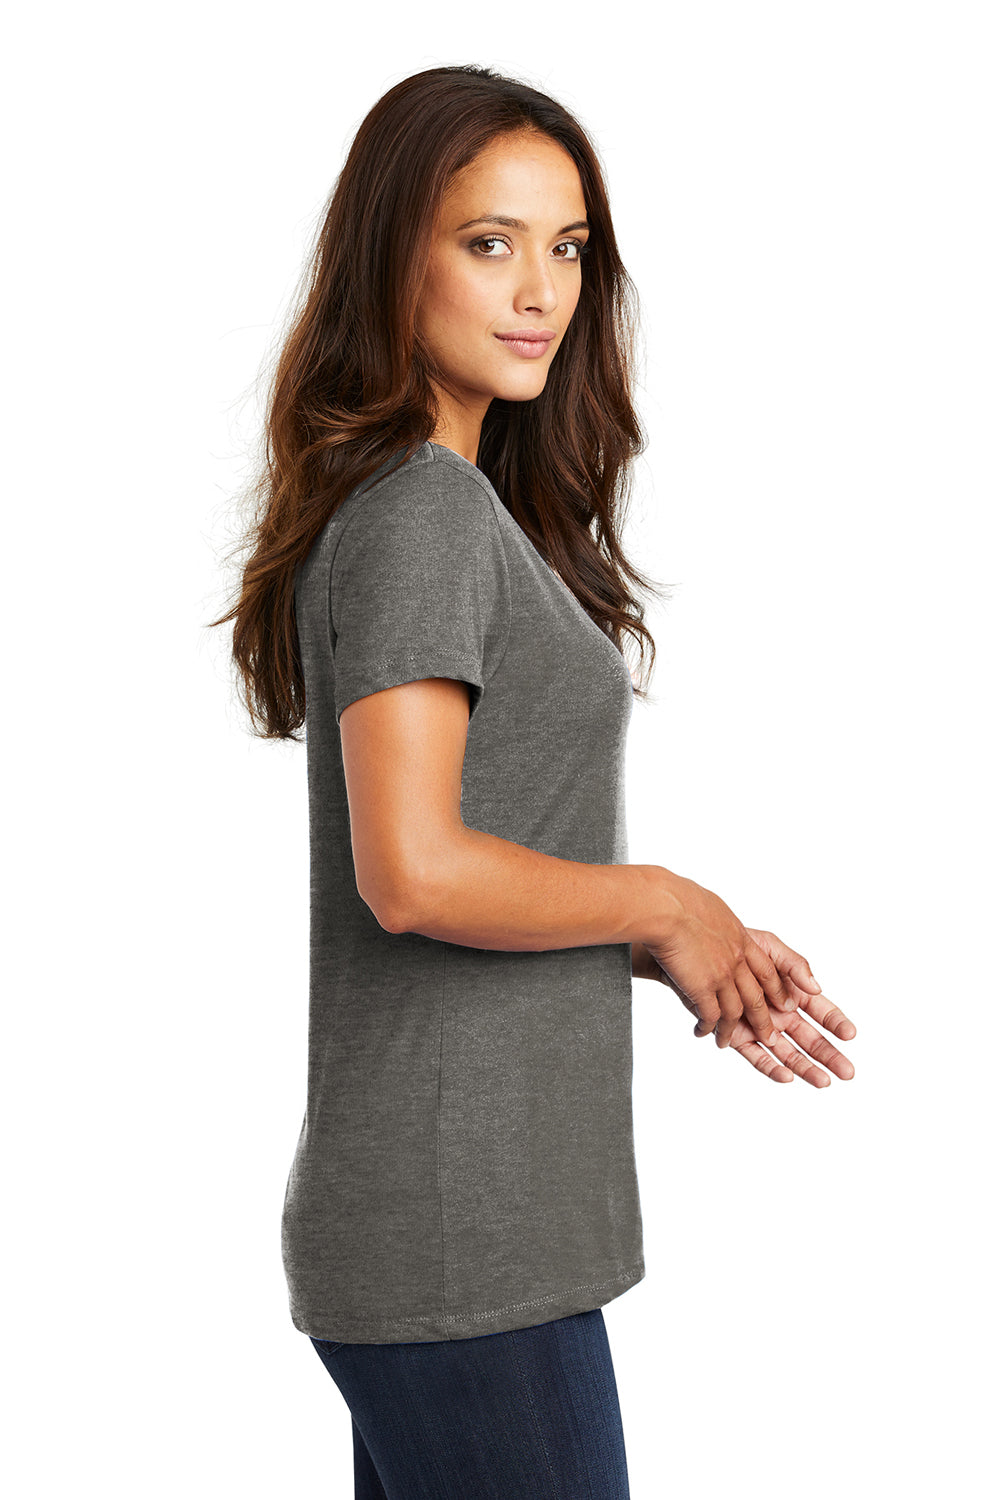 District DM1170L Womens Perfect Weight Short Sleeve V-Neck T-Shirt Heather Charcoal Grey Side